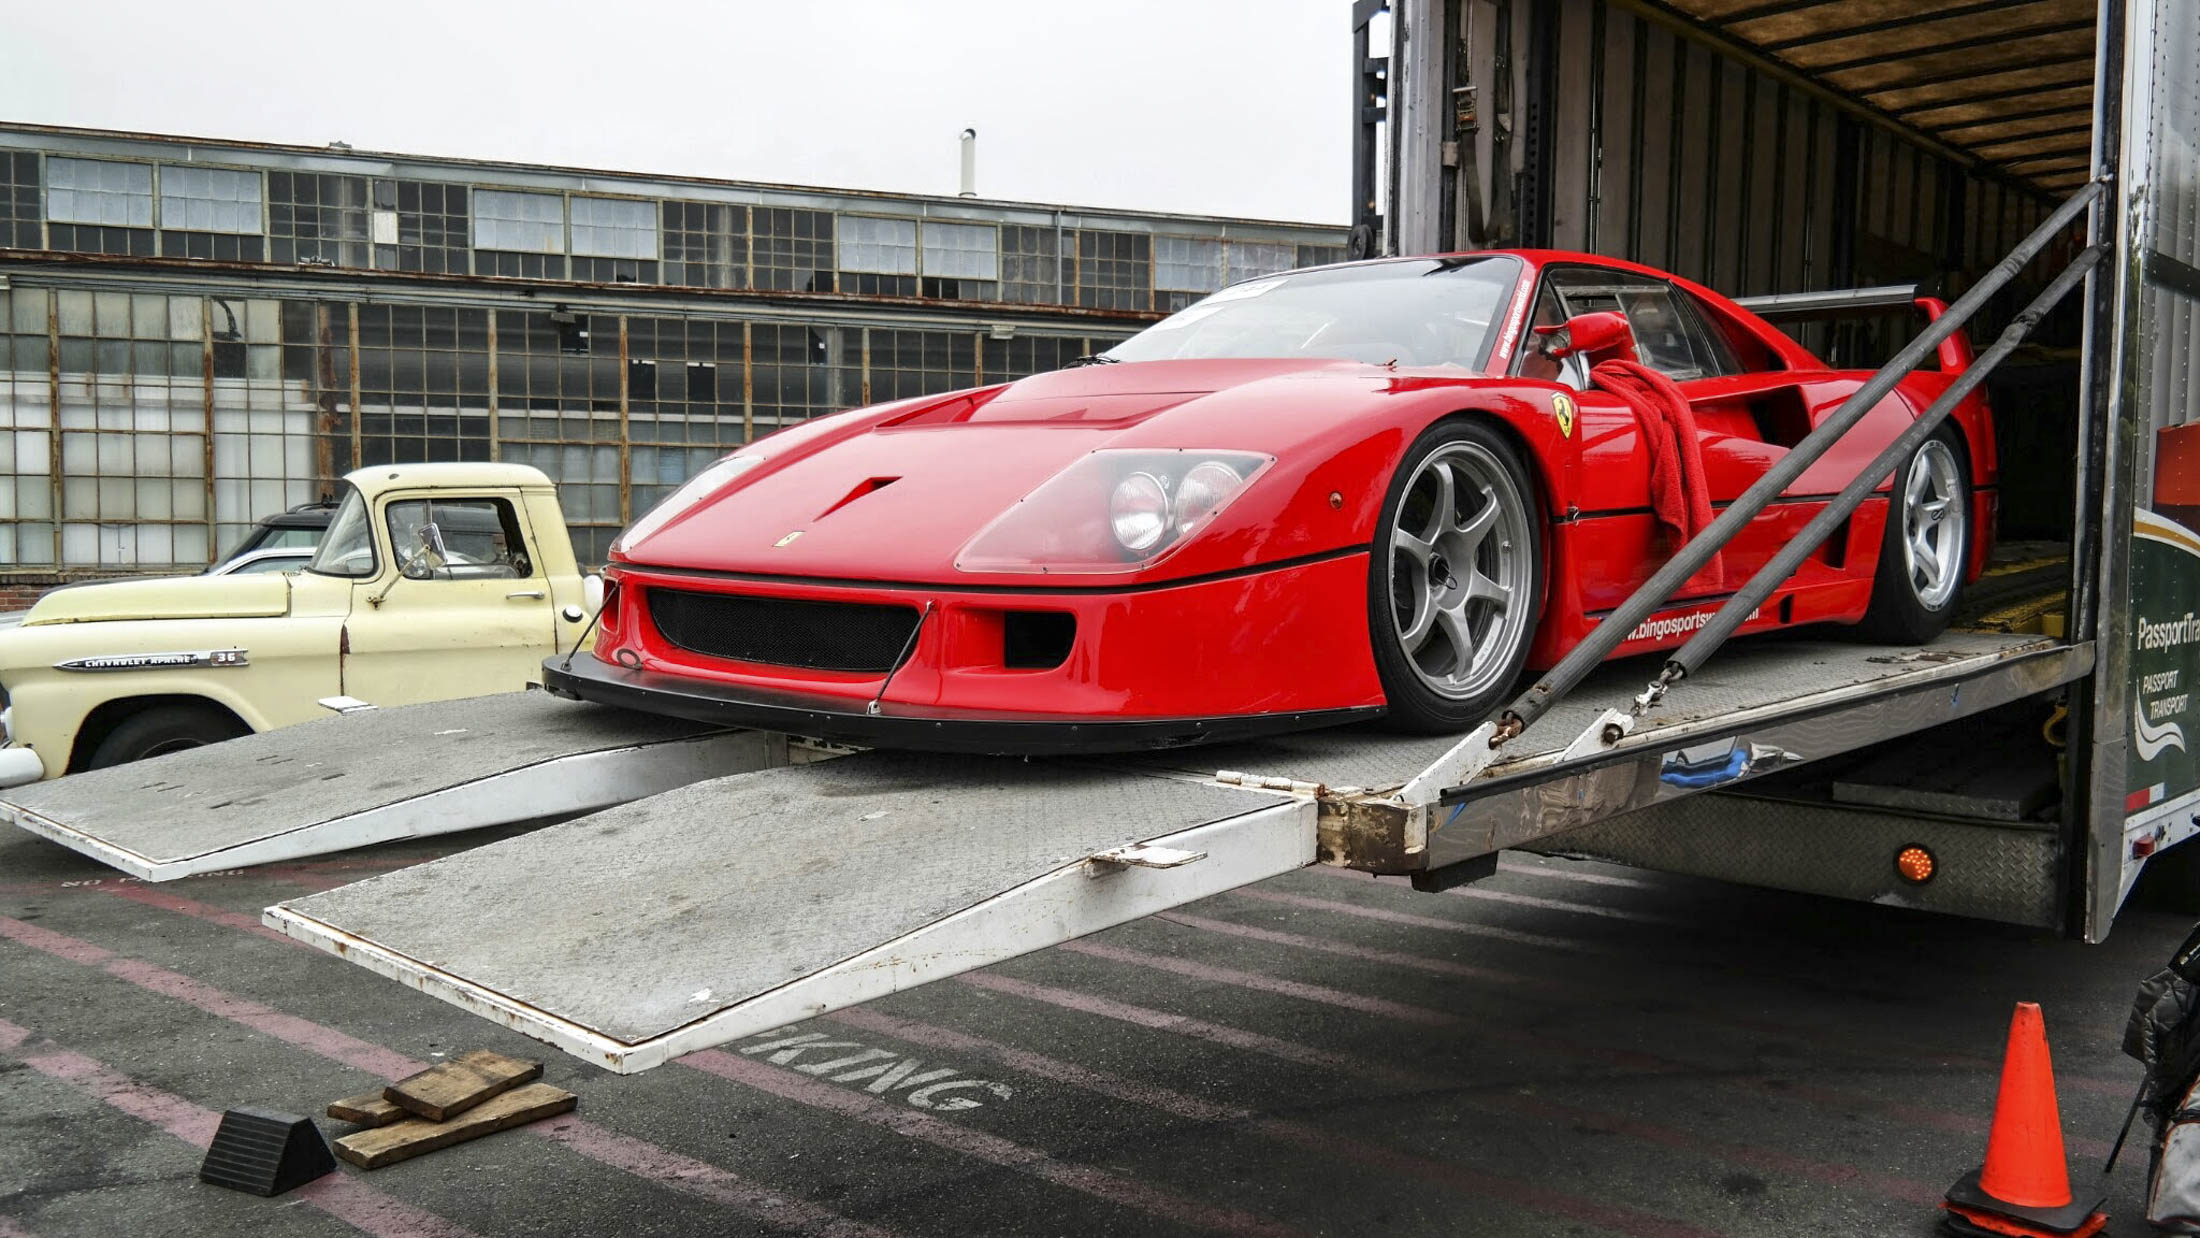 Leave detailed instructions with the shipper as to how to drive, park, and engage the parking brake on sensitive cars such as this Ferrari F40 LM. Photographer:Dmitriy Shibarshin